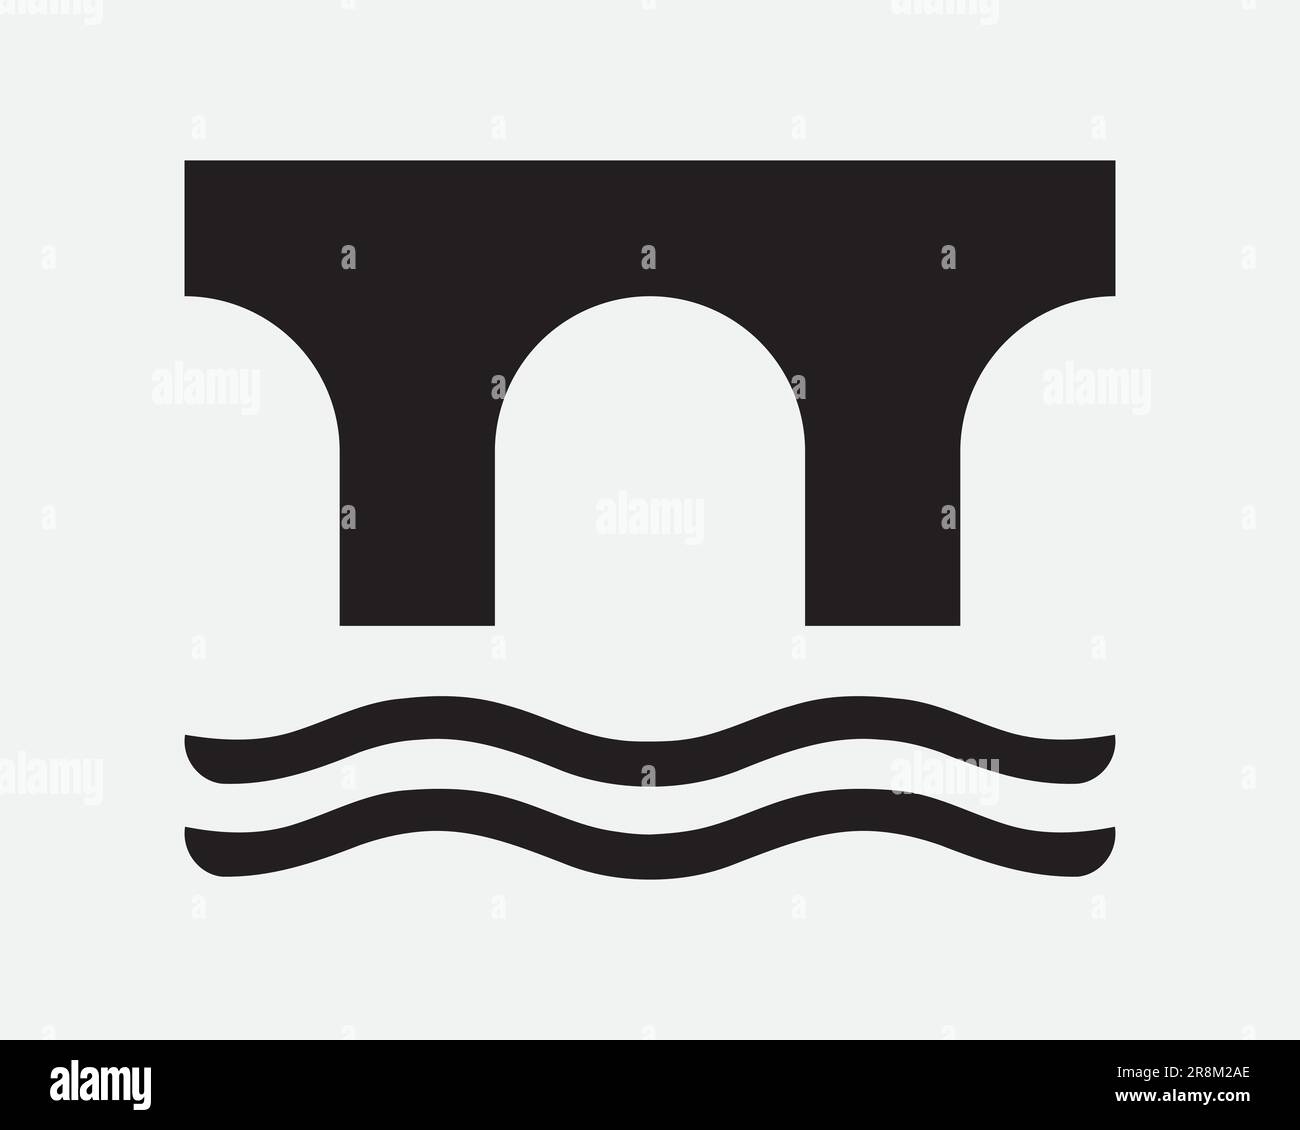 Arch Bridge with Water Icon River Architecture Support Column Pillar Crossing Black White Sign Symbol Illustration Artwork Graphic Clipart EPS Vector Stock Vector